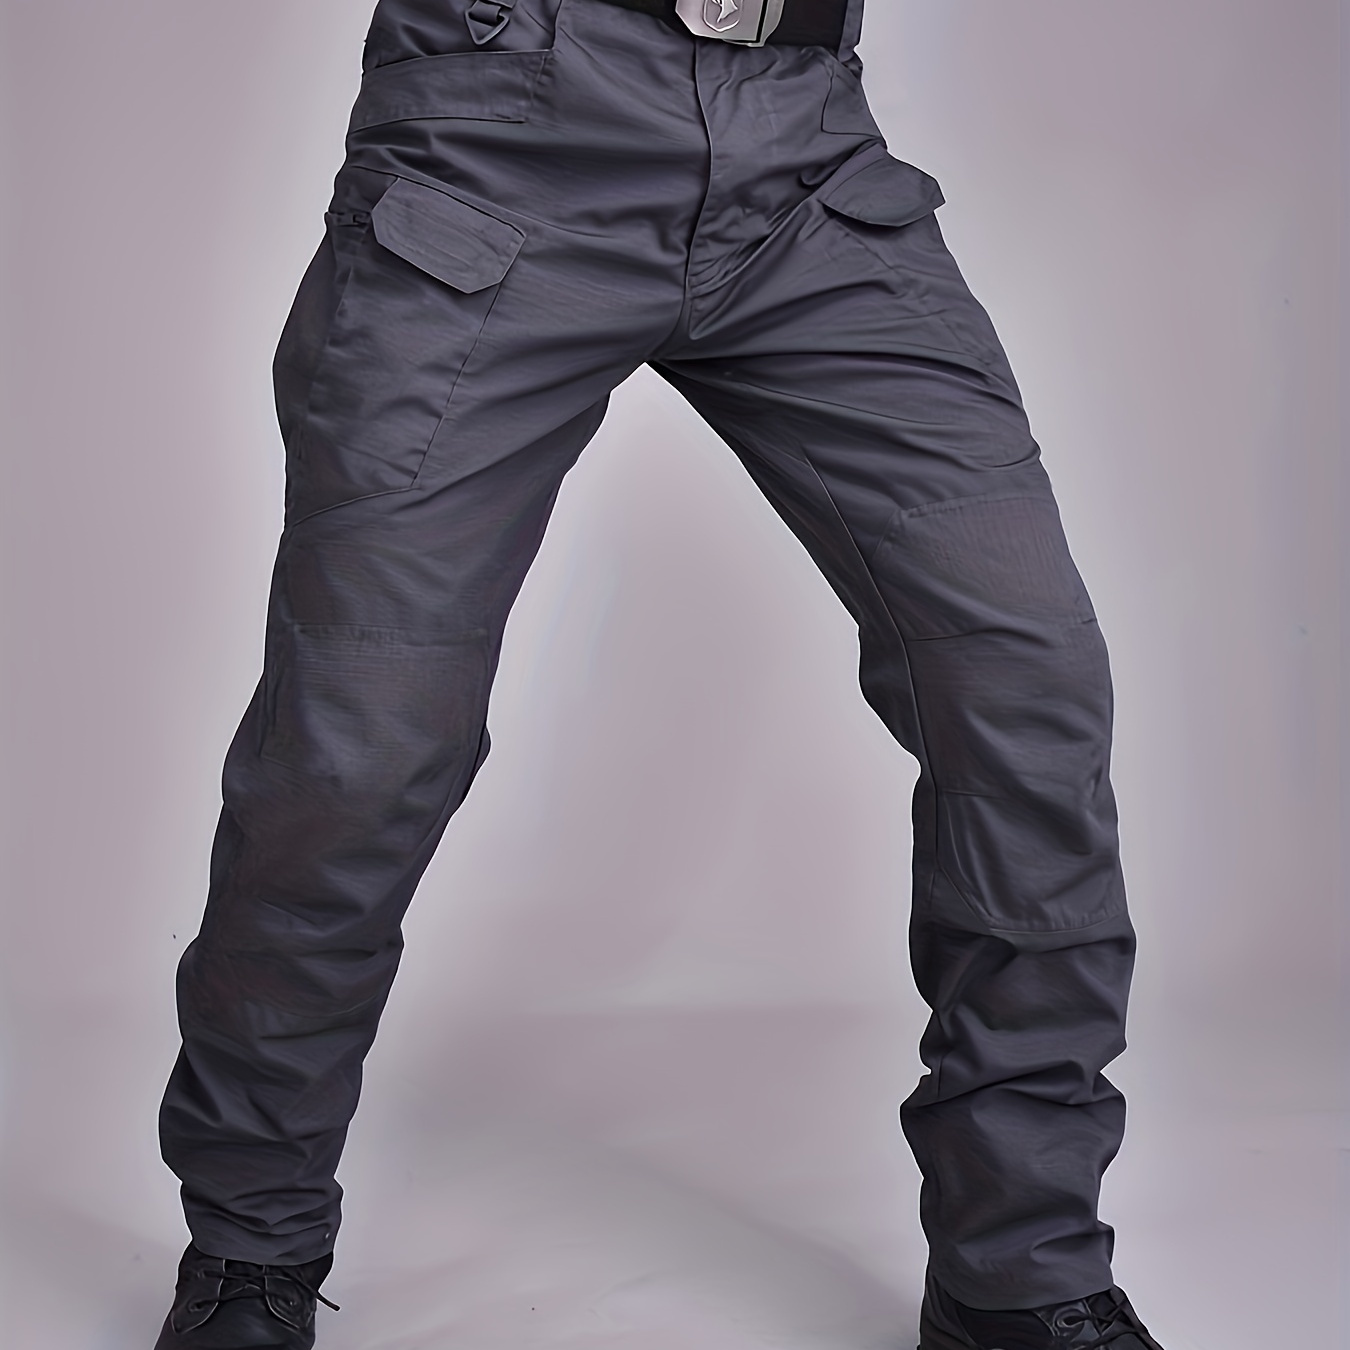 Men's Tactical Pants Army Users Outside Sports Hiking Pants